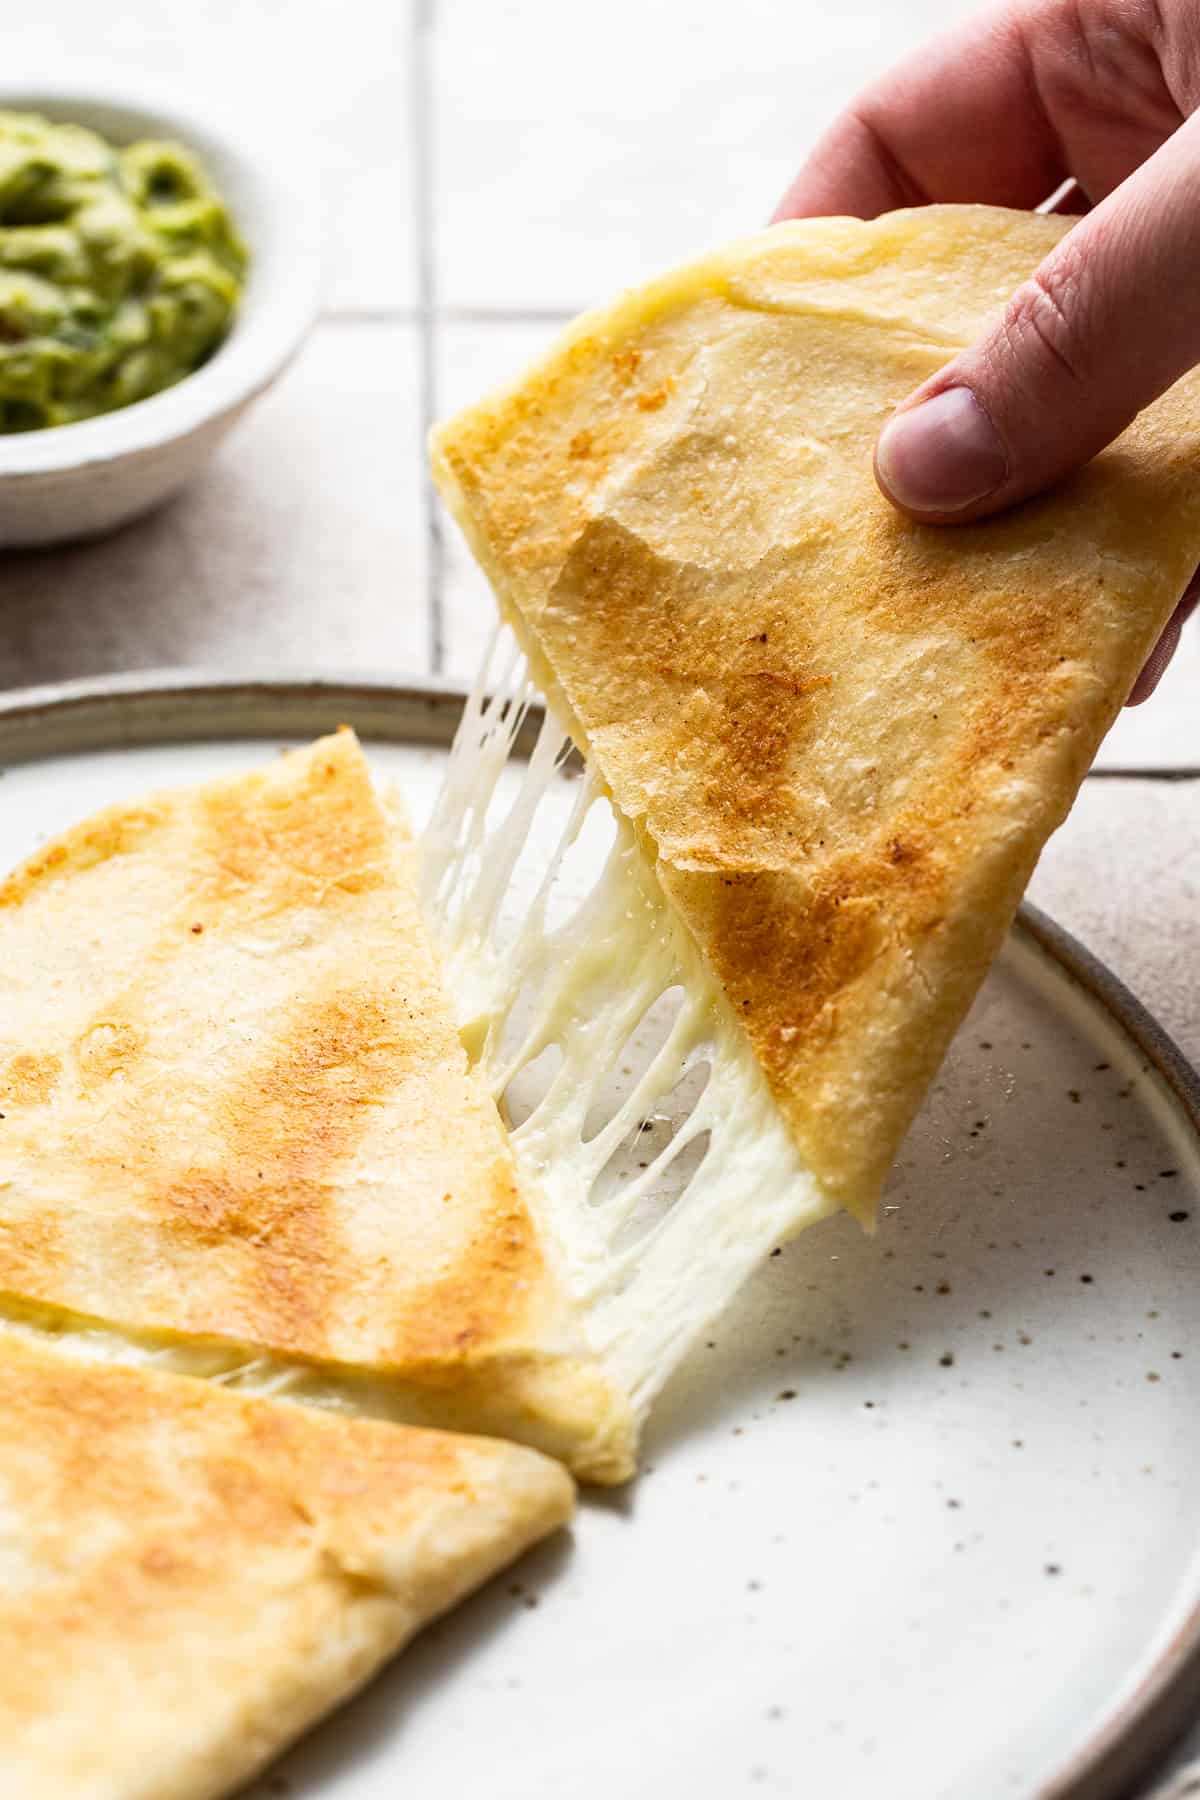 A cheese quesadilla slice being pulled to reveal melted stretchy ooey-gooey cheese.